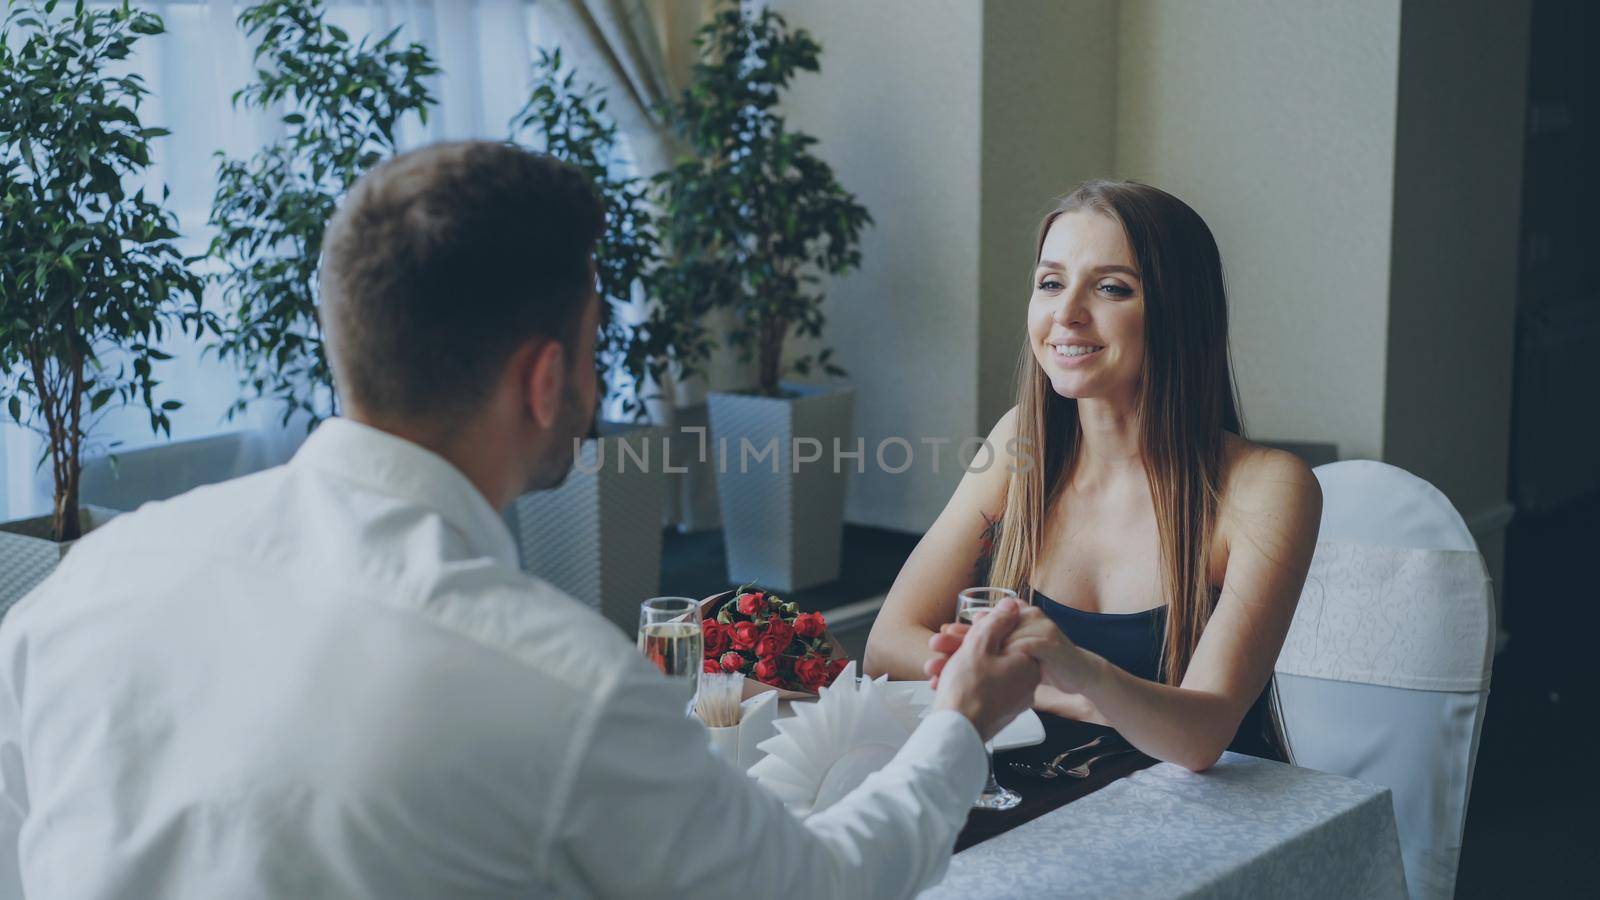 Young attractive girl in fancy clothes is talking to her boyfriend while dining in restaurant. Flowers, champagne glasses, green plants and tableware are visible. by silverkblack